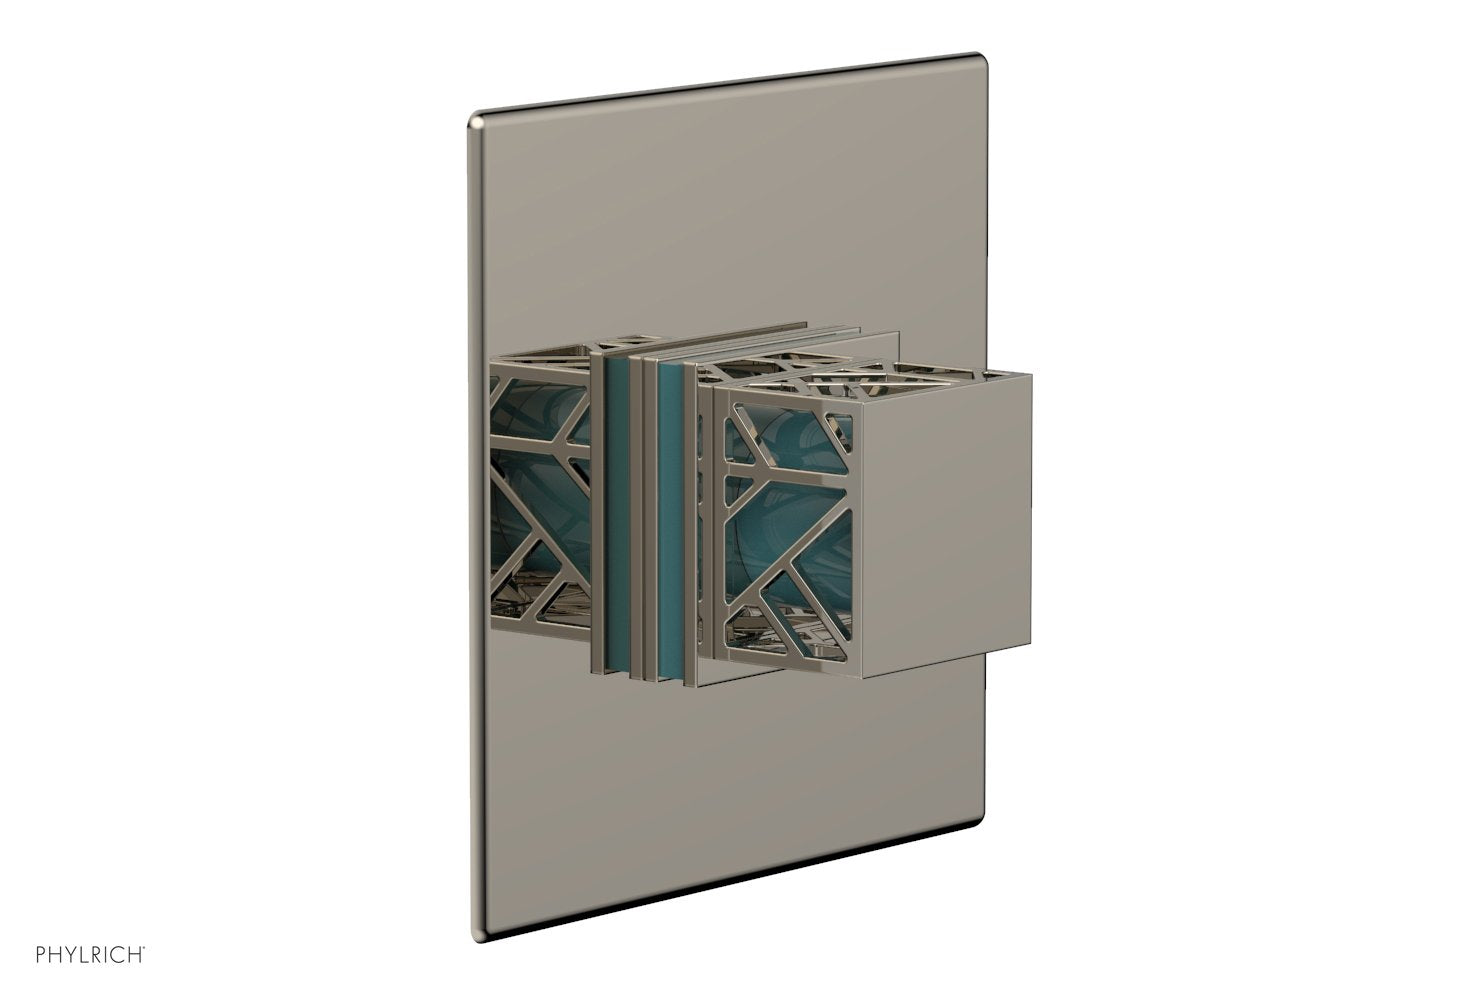 Phylrich JOLIE Thermostatic Shower Trim, Square Handle with "Turquoise" Accents